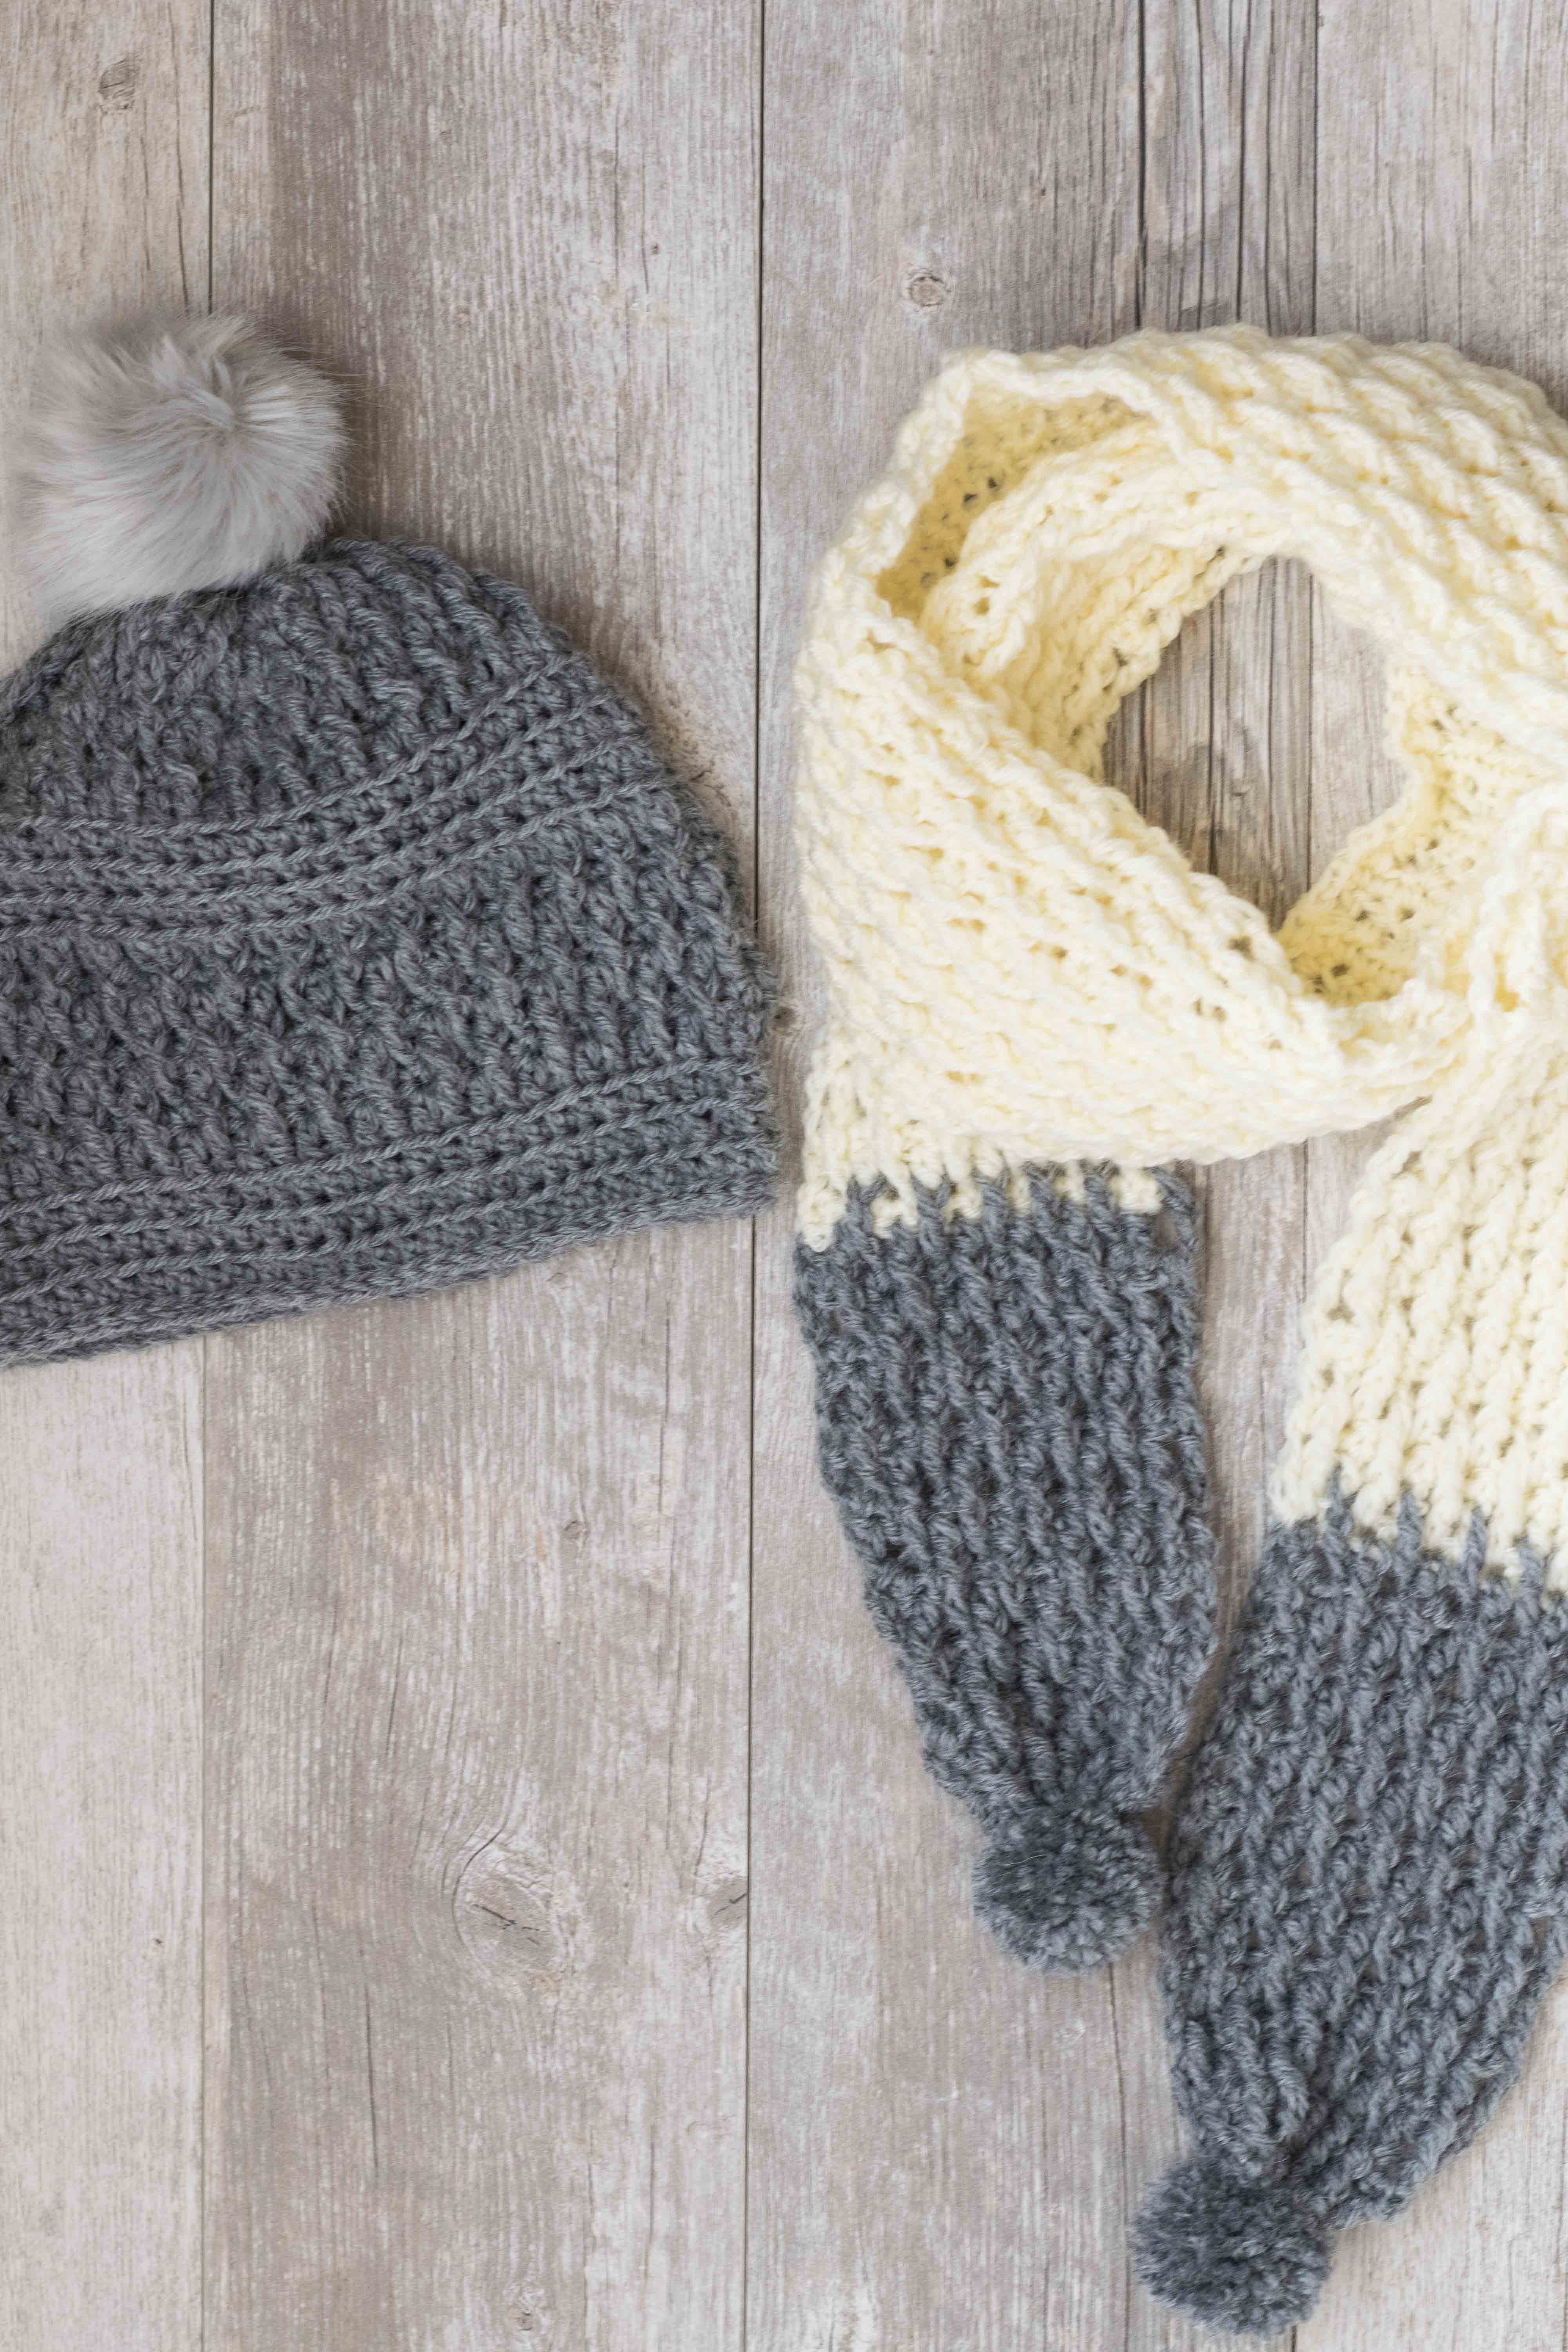 5 Crochet Hat And Scarf Pattern Sets